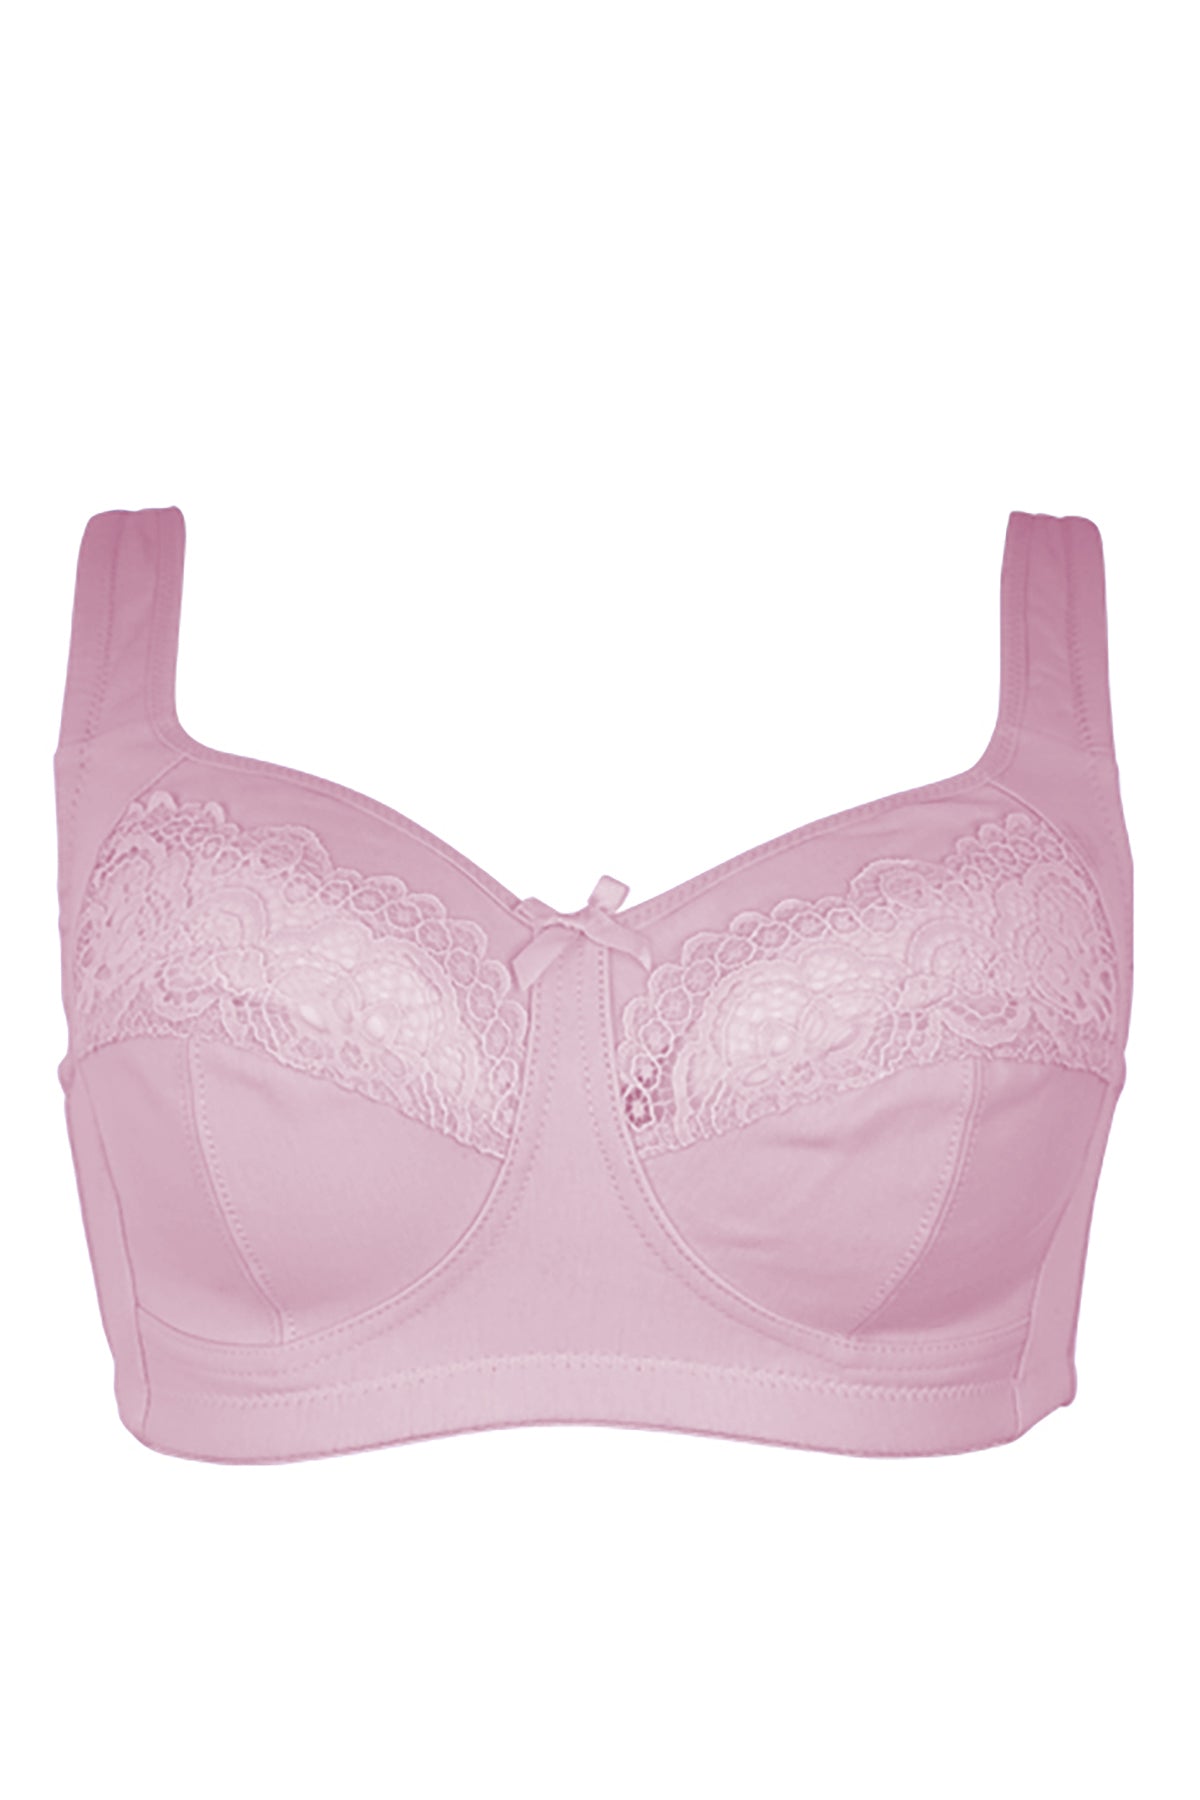 M&S Bras 32A White/Pink PK2 Cotton Rich Balcony Underwired Padded BNWT -  Against Breast Cancer